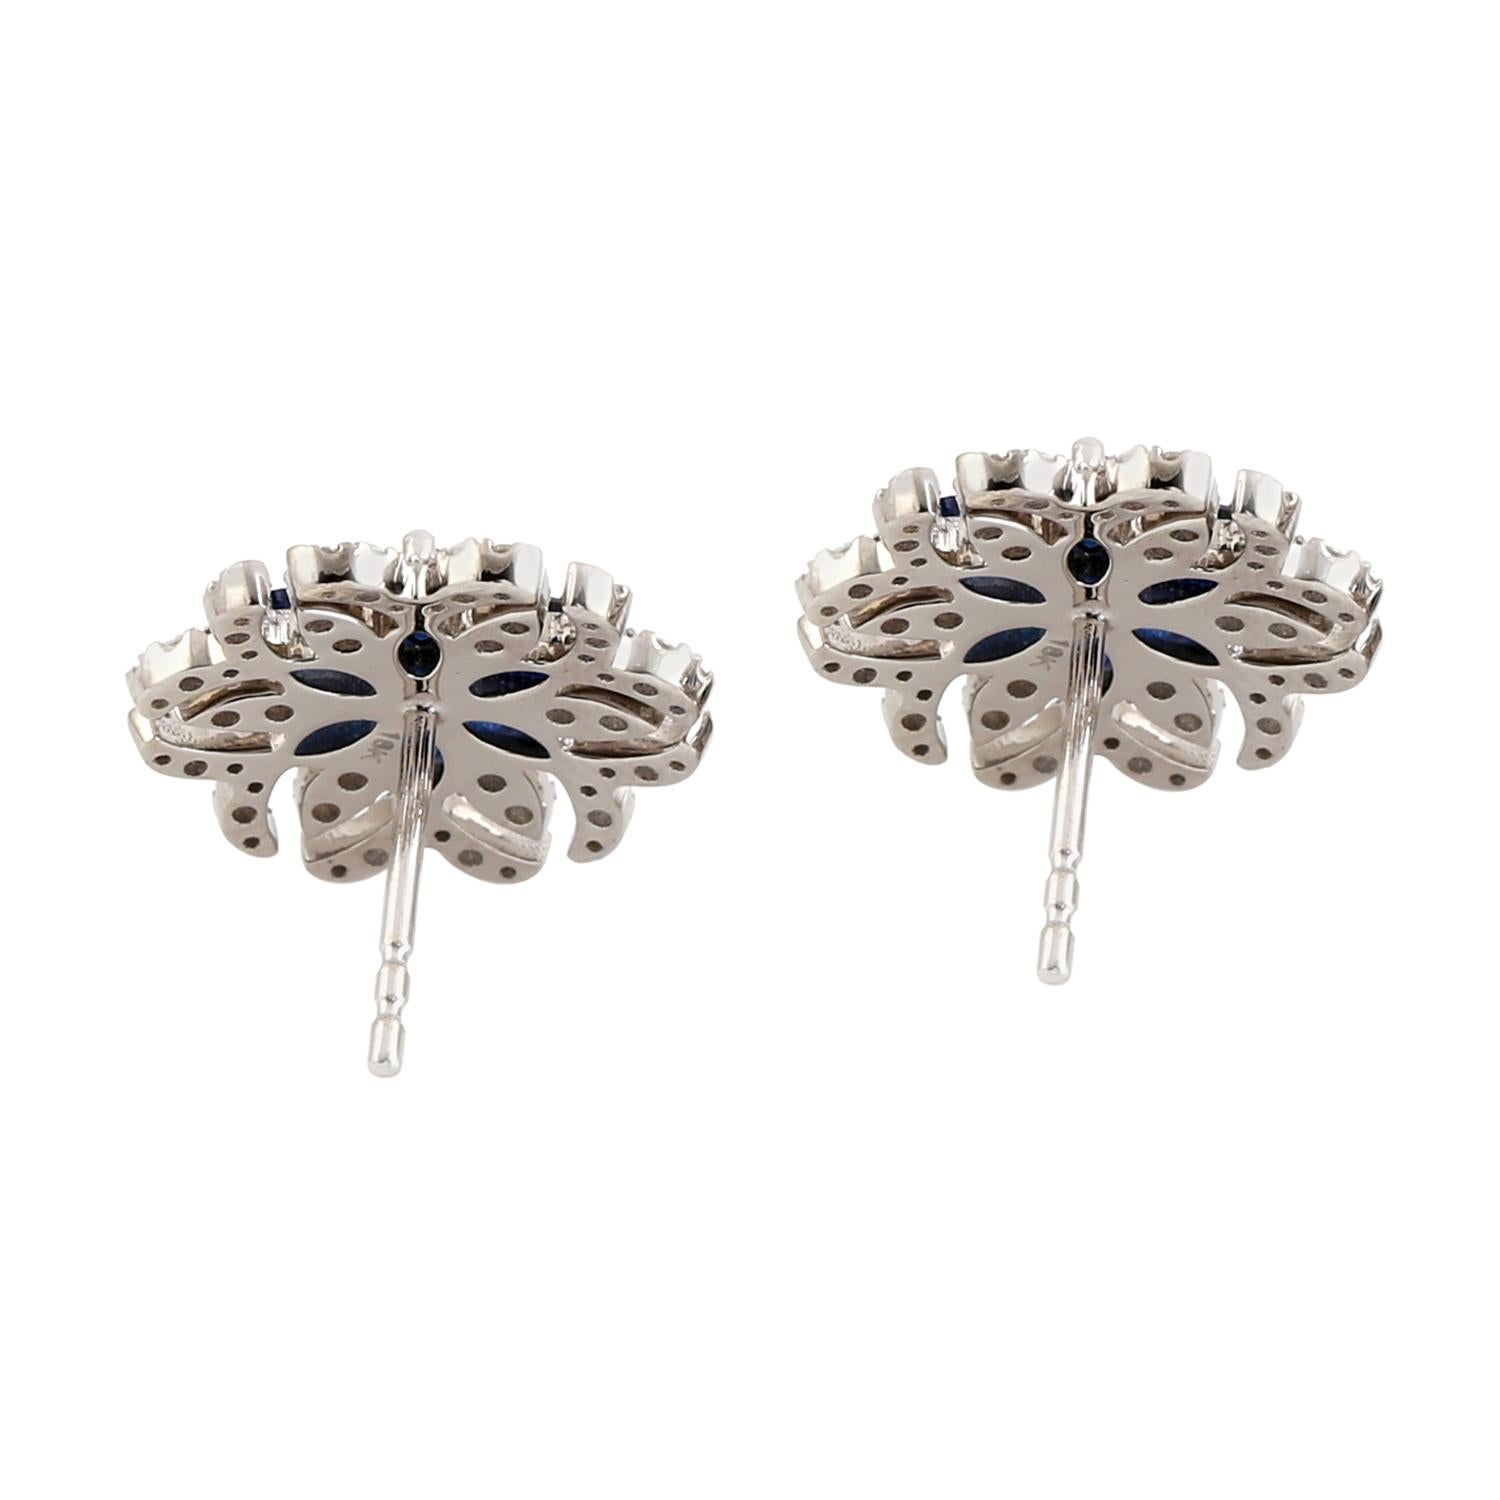 These earrings are designed in the shape of flowers and feature beautiful blue sapphires and diamonds set in 18k white gold. Surrounding the sapphires are sparkling diamonds, which add a touch of shine and glamour to the overall design. The white